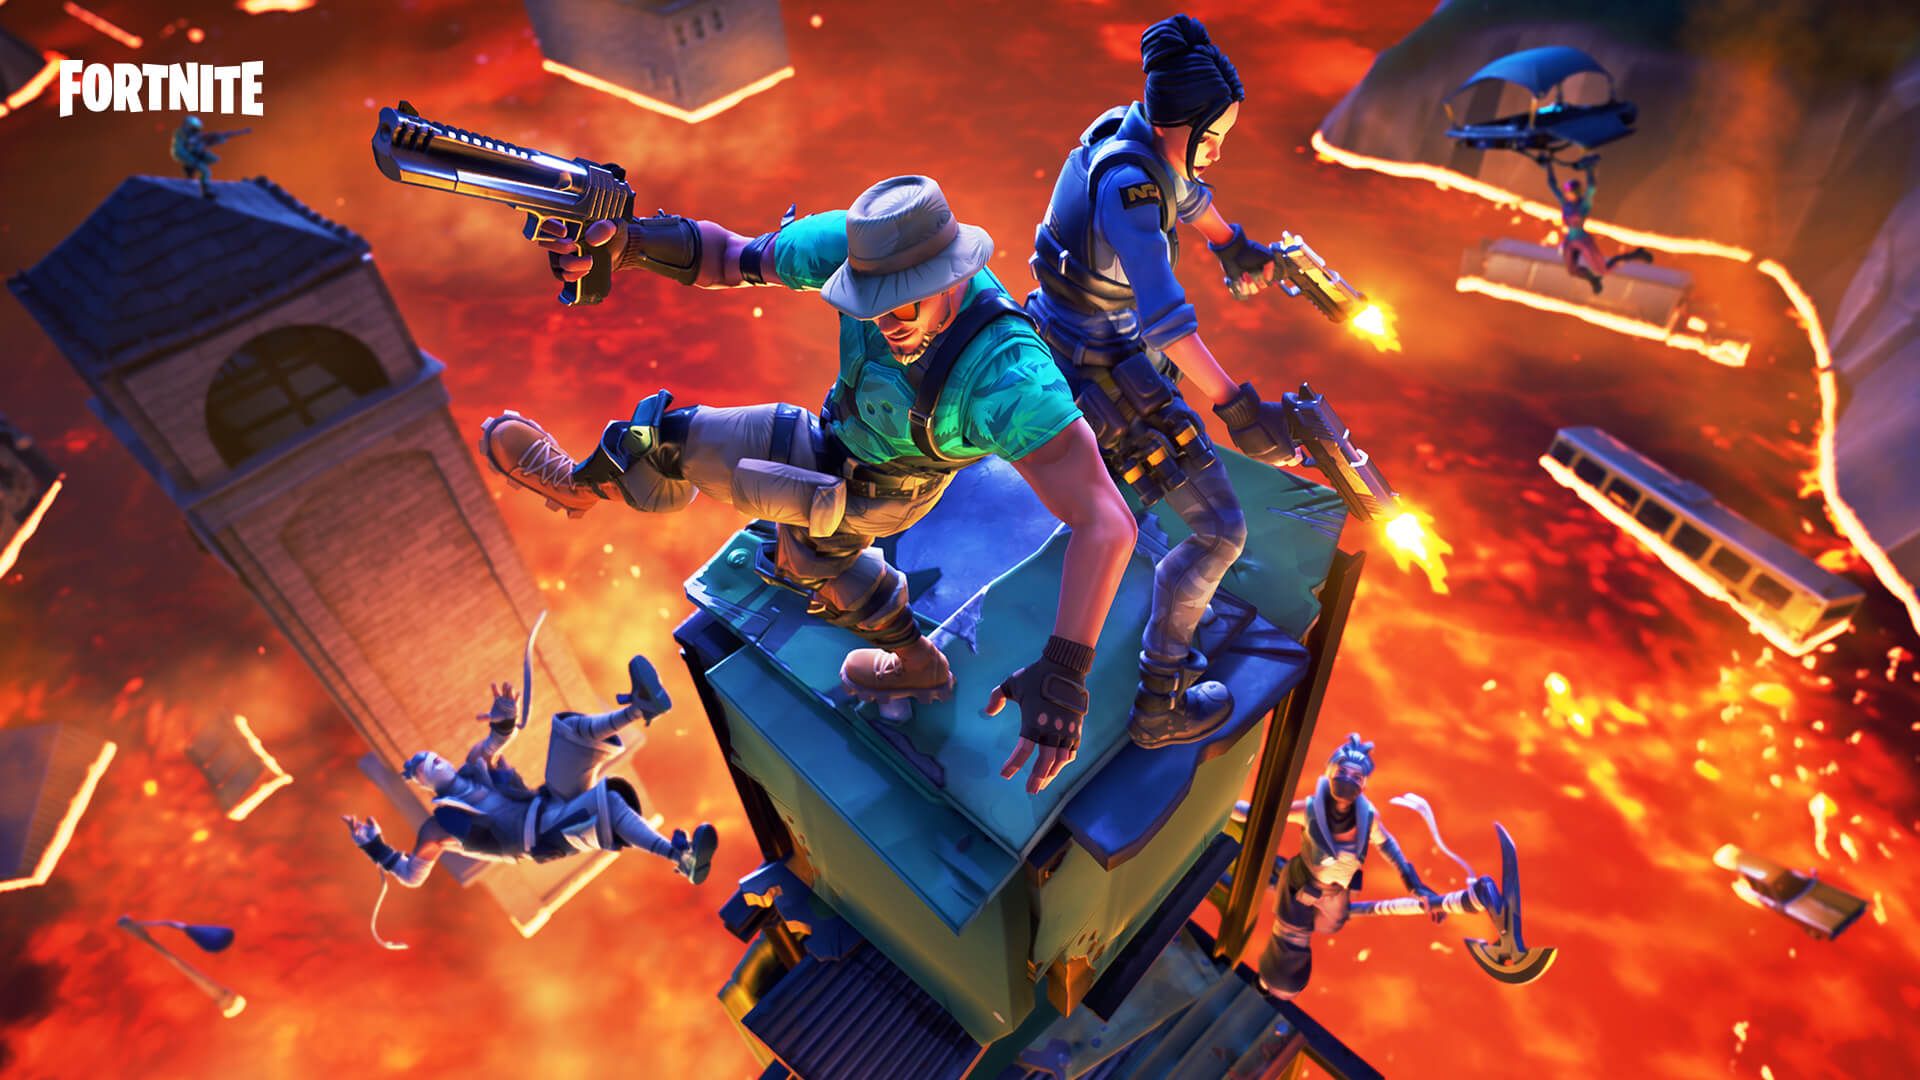 New Fortnite Leaks Suggest The Volcano Isn't Just For Show